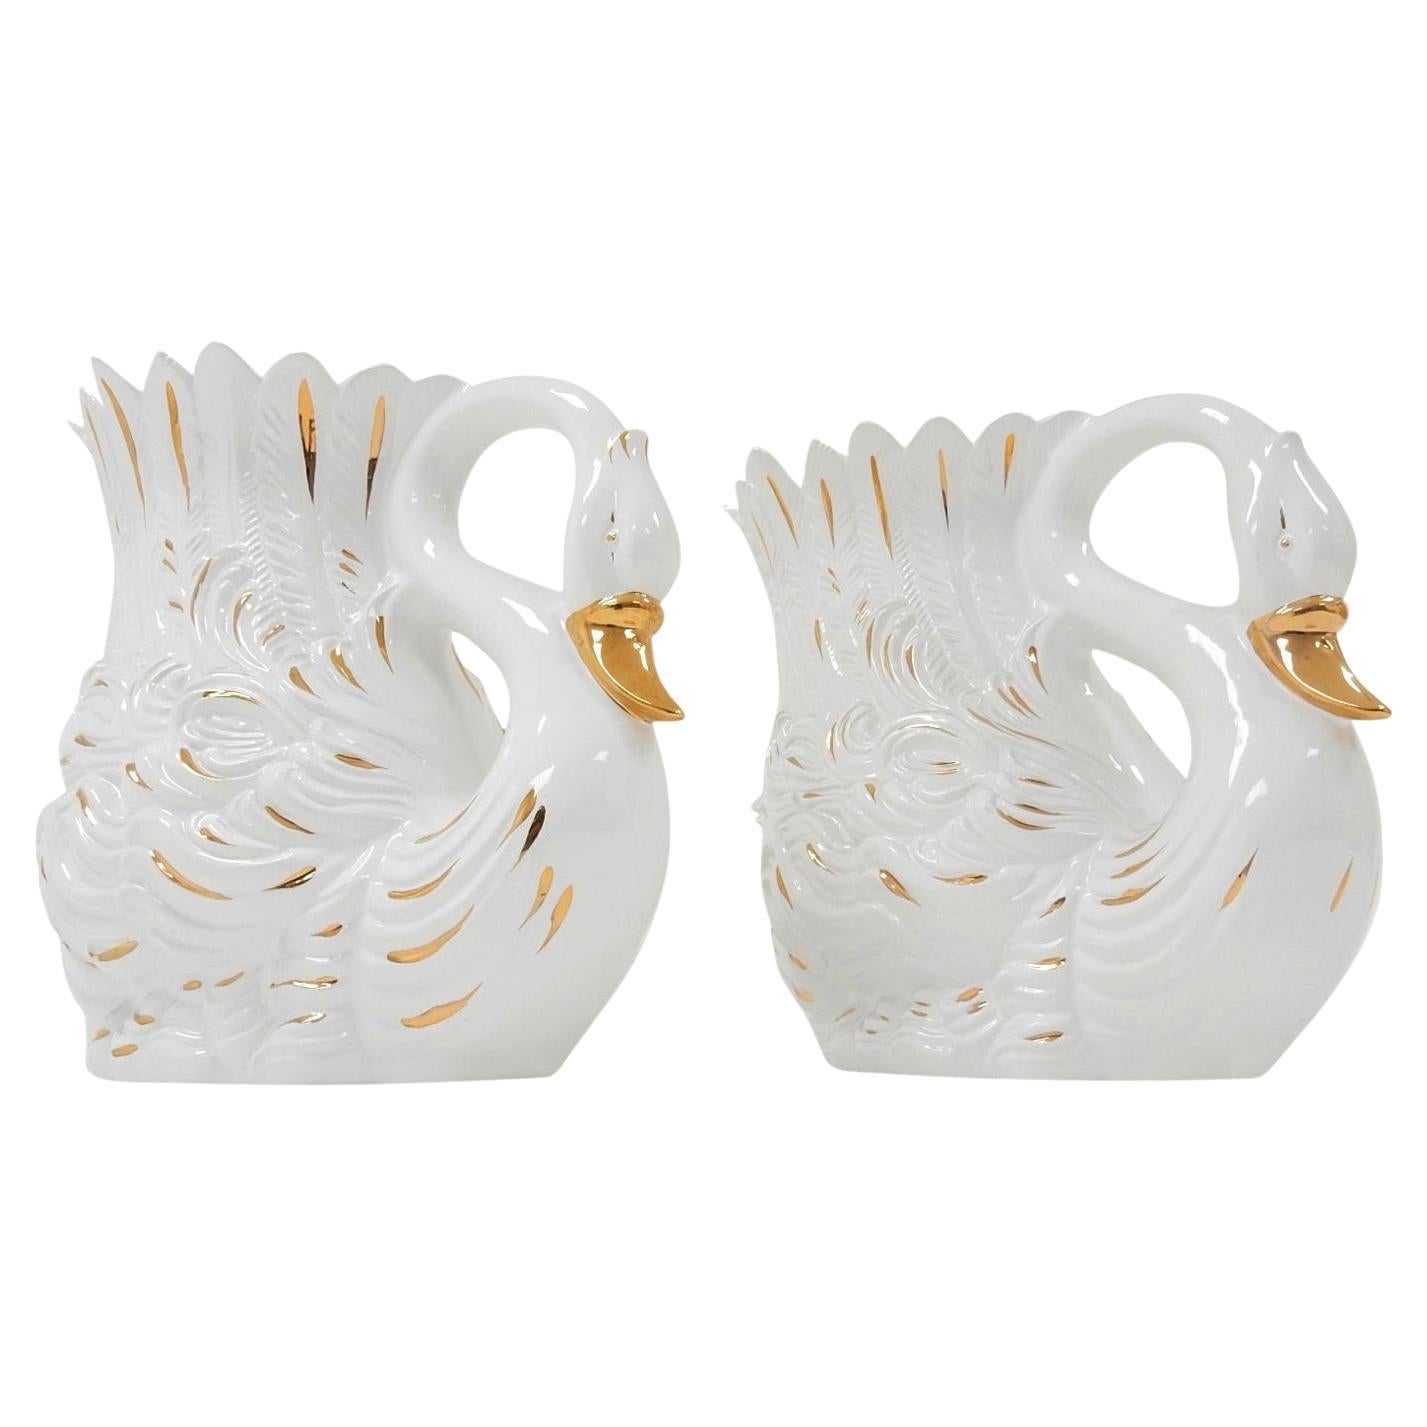 Venetian Life Size Swan Vessel Planters by Bassano, Italy For Sale